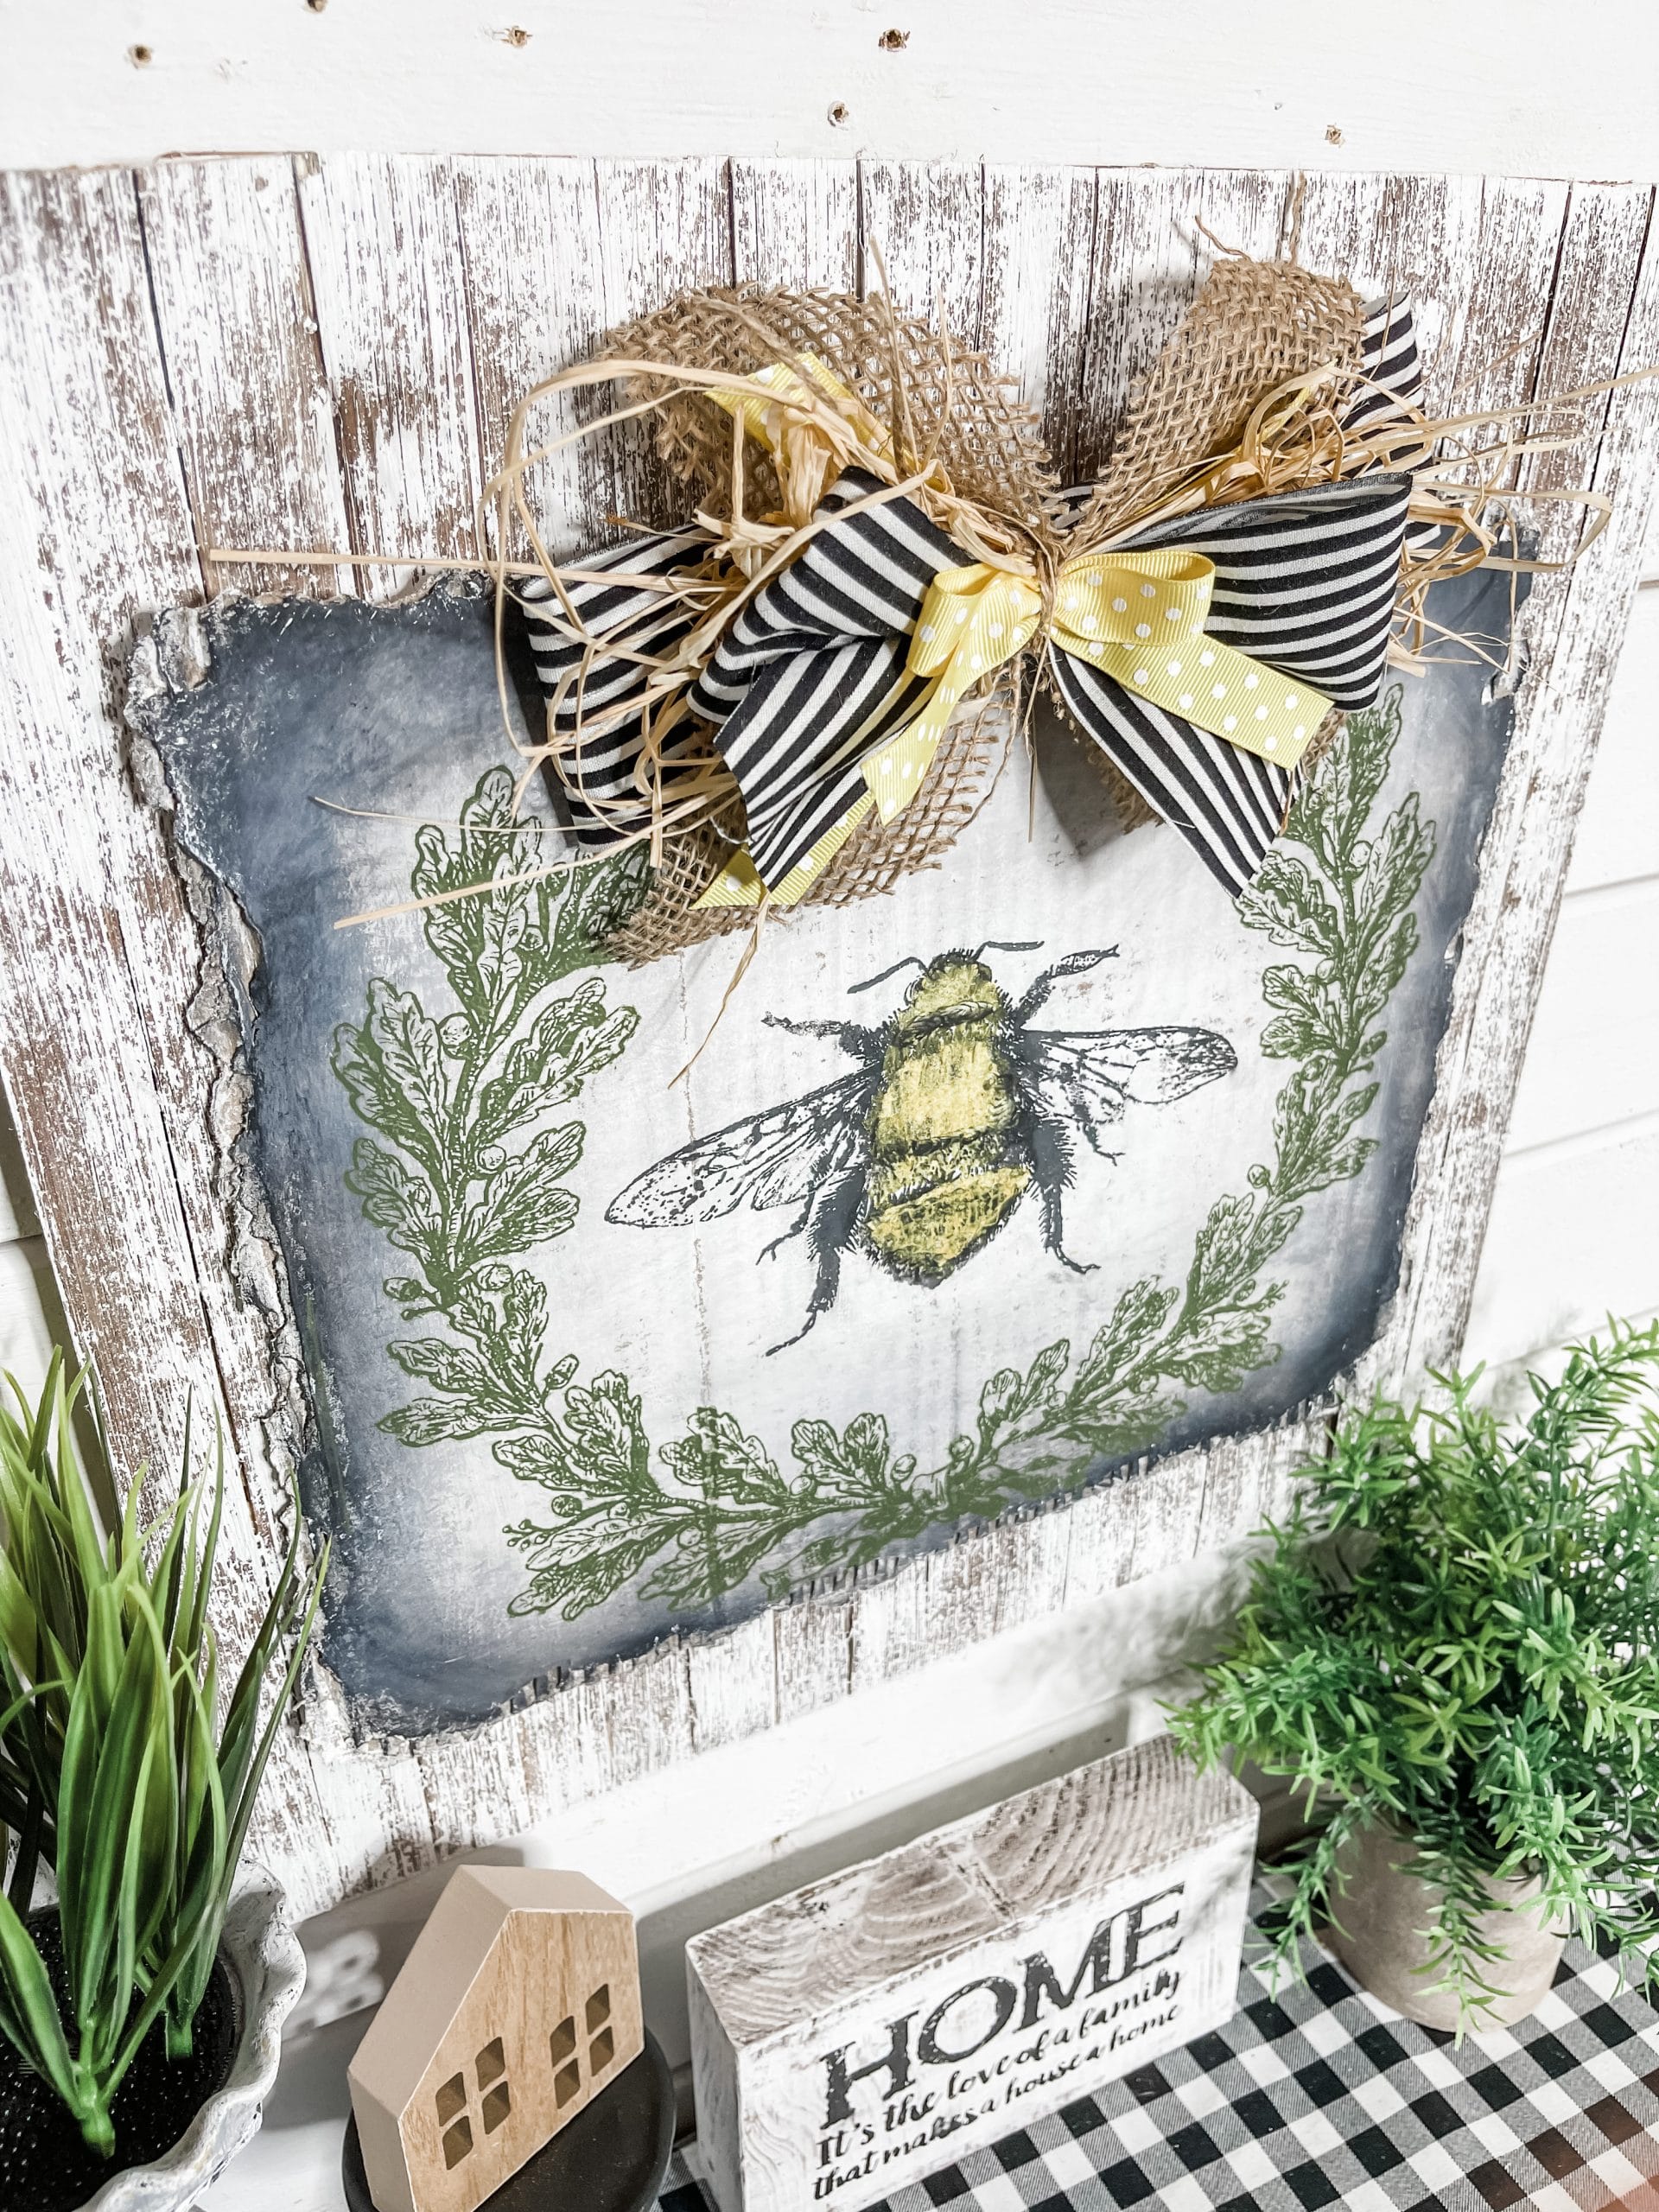 Sitting Bumble Bee Decor DIY Craft kit for paint parties Bee Kind  Unfinished DIY Wood Kit, Blanks to Decorate Home Decor –  RusticFarmhouseDecor